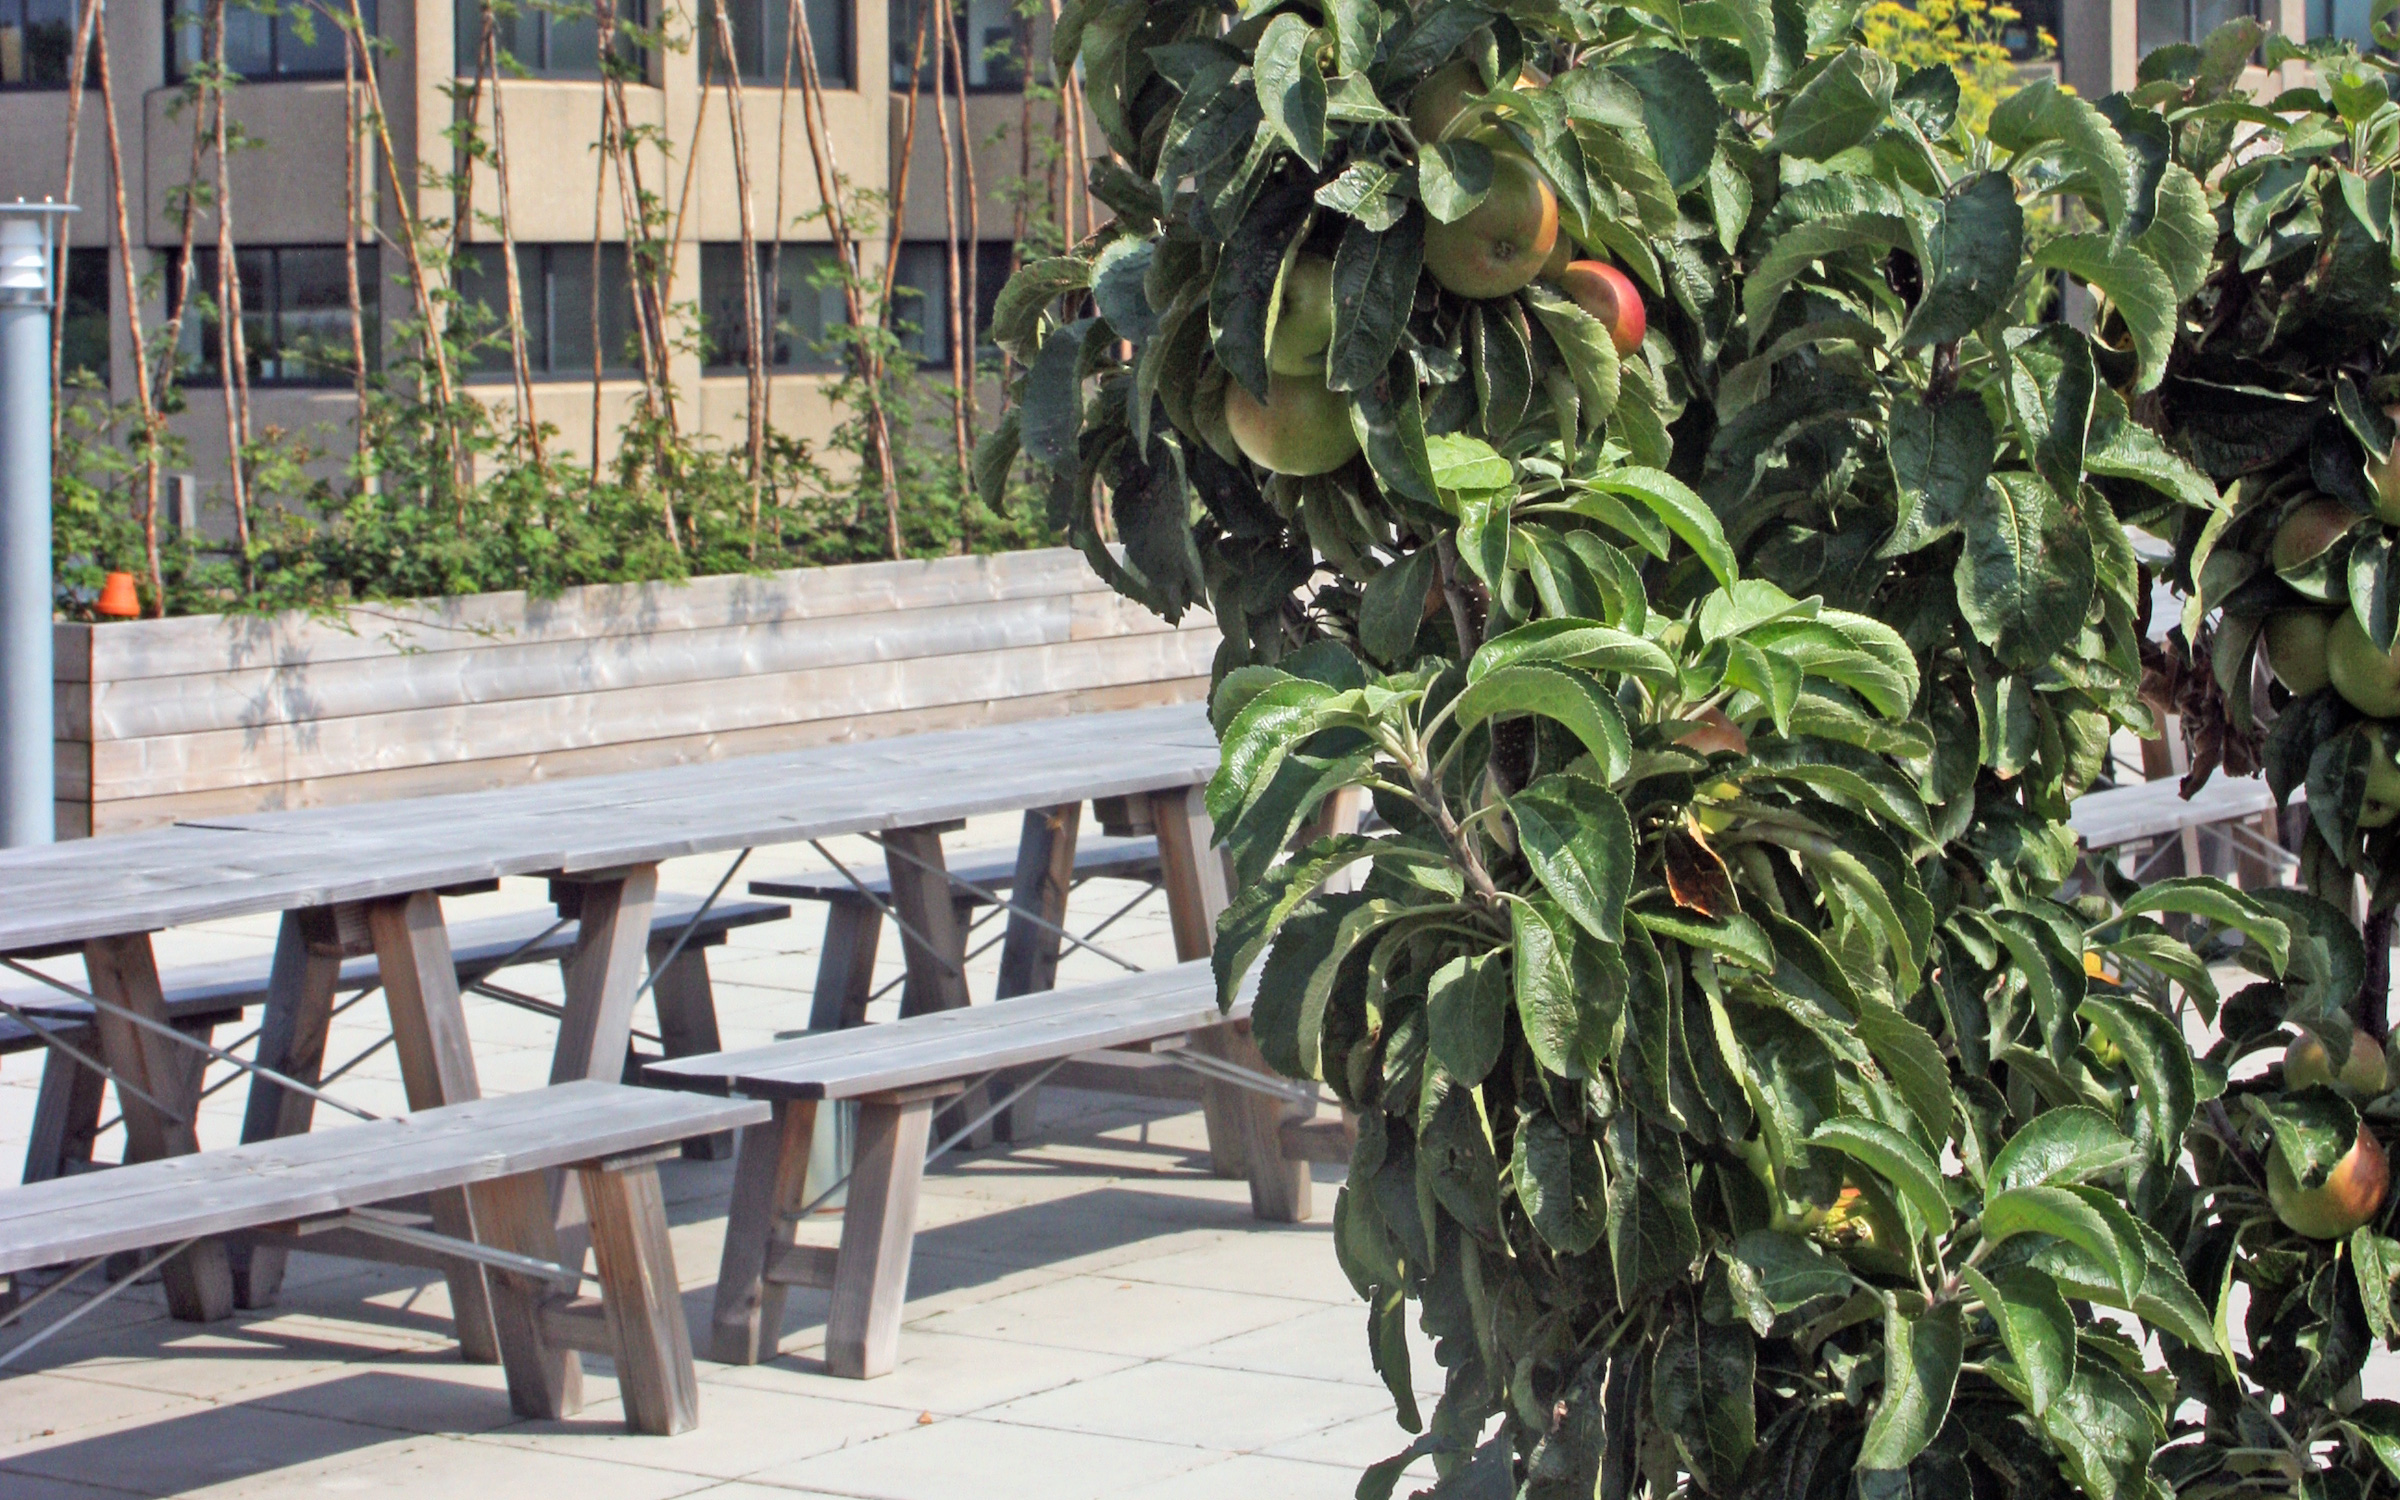 Small apple trees in front of benches and tables on a roof